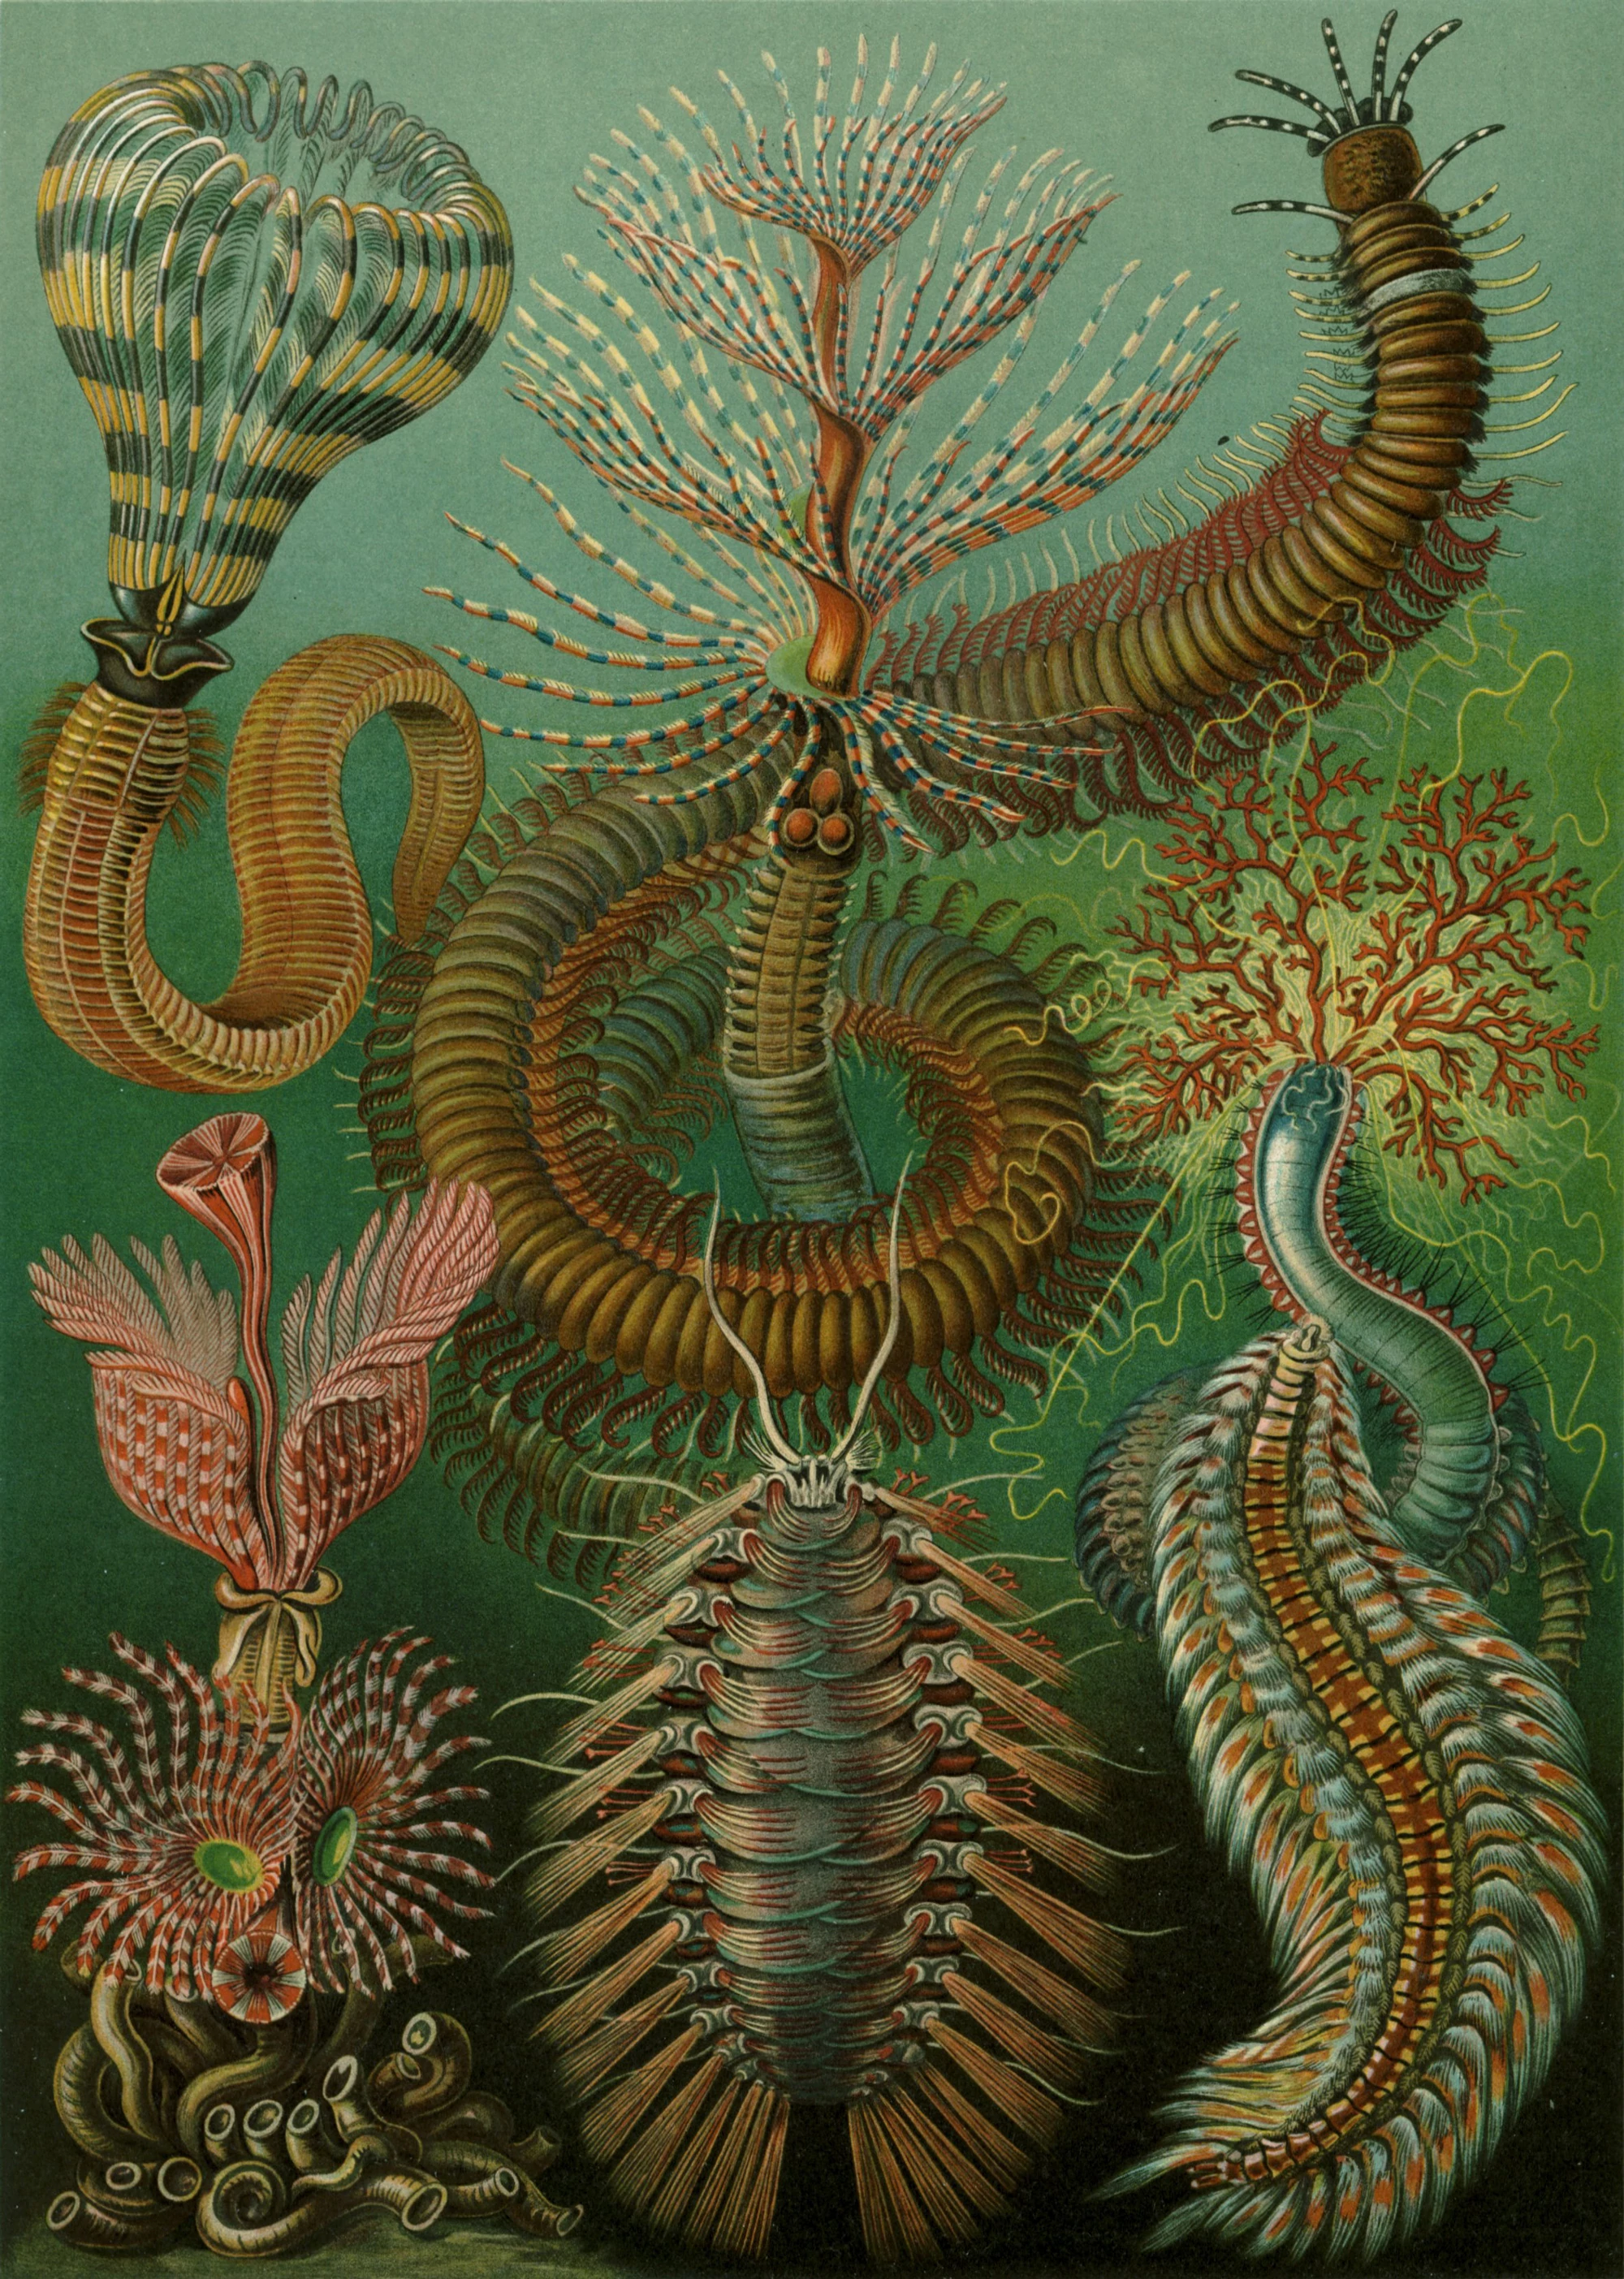 Art Forms in Nature, Plate 96: Chaetopoda, Ernst Haeckel